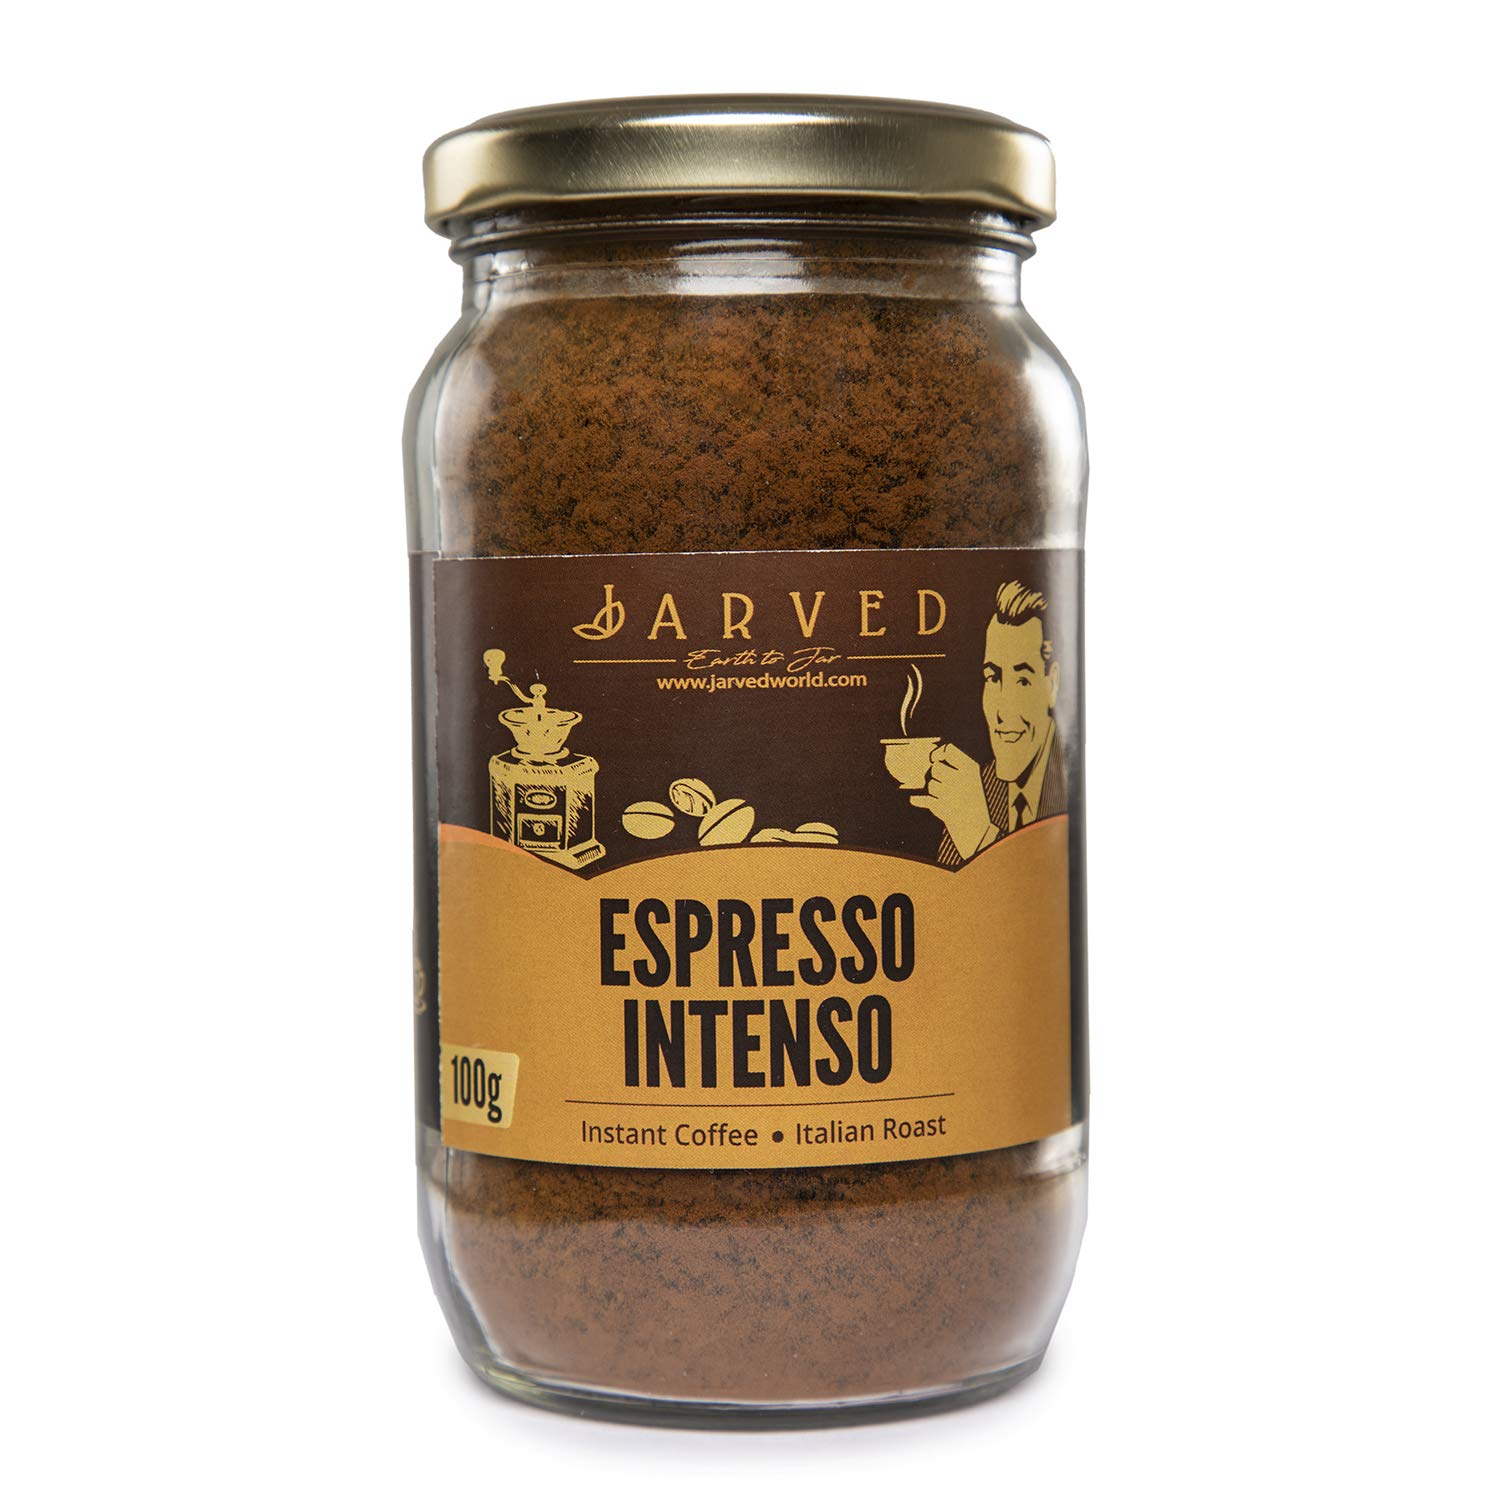 Jarved Espresso Intenso Instant Coffee Image